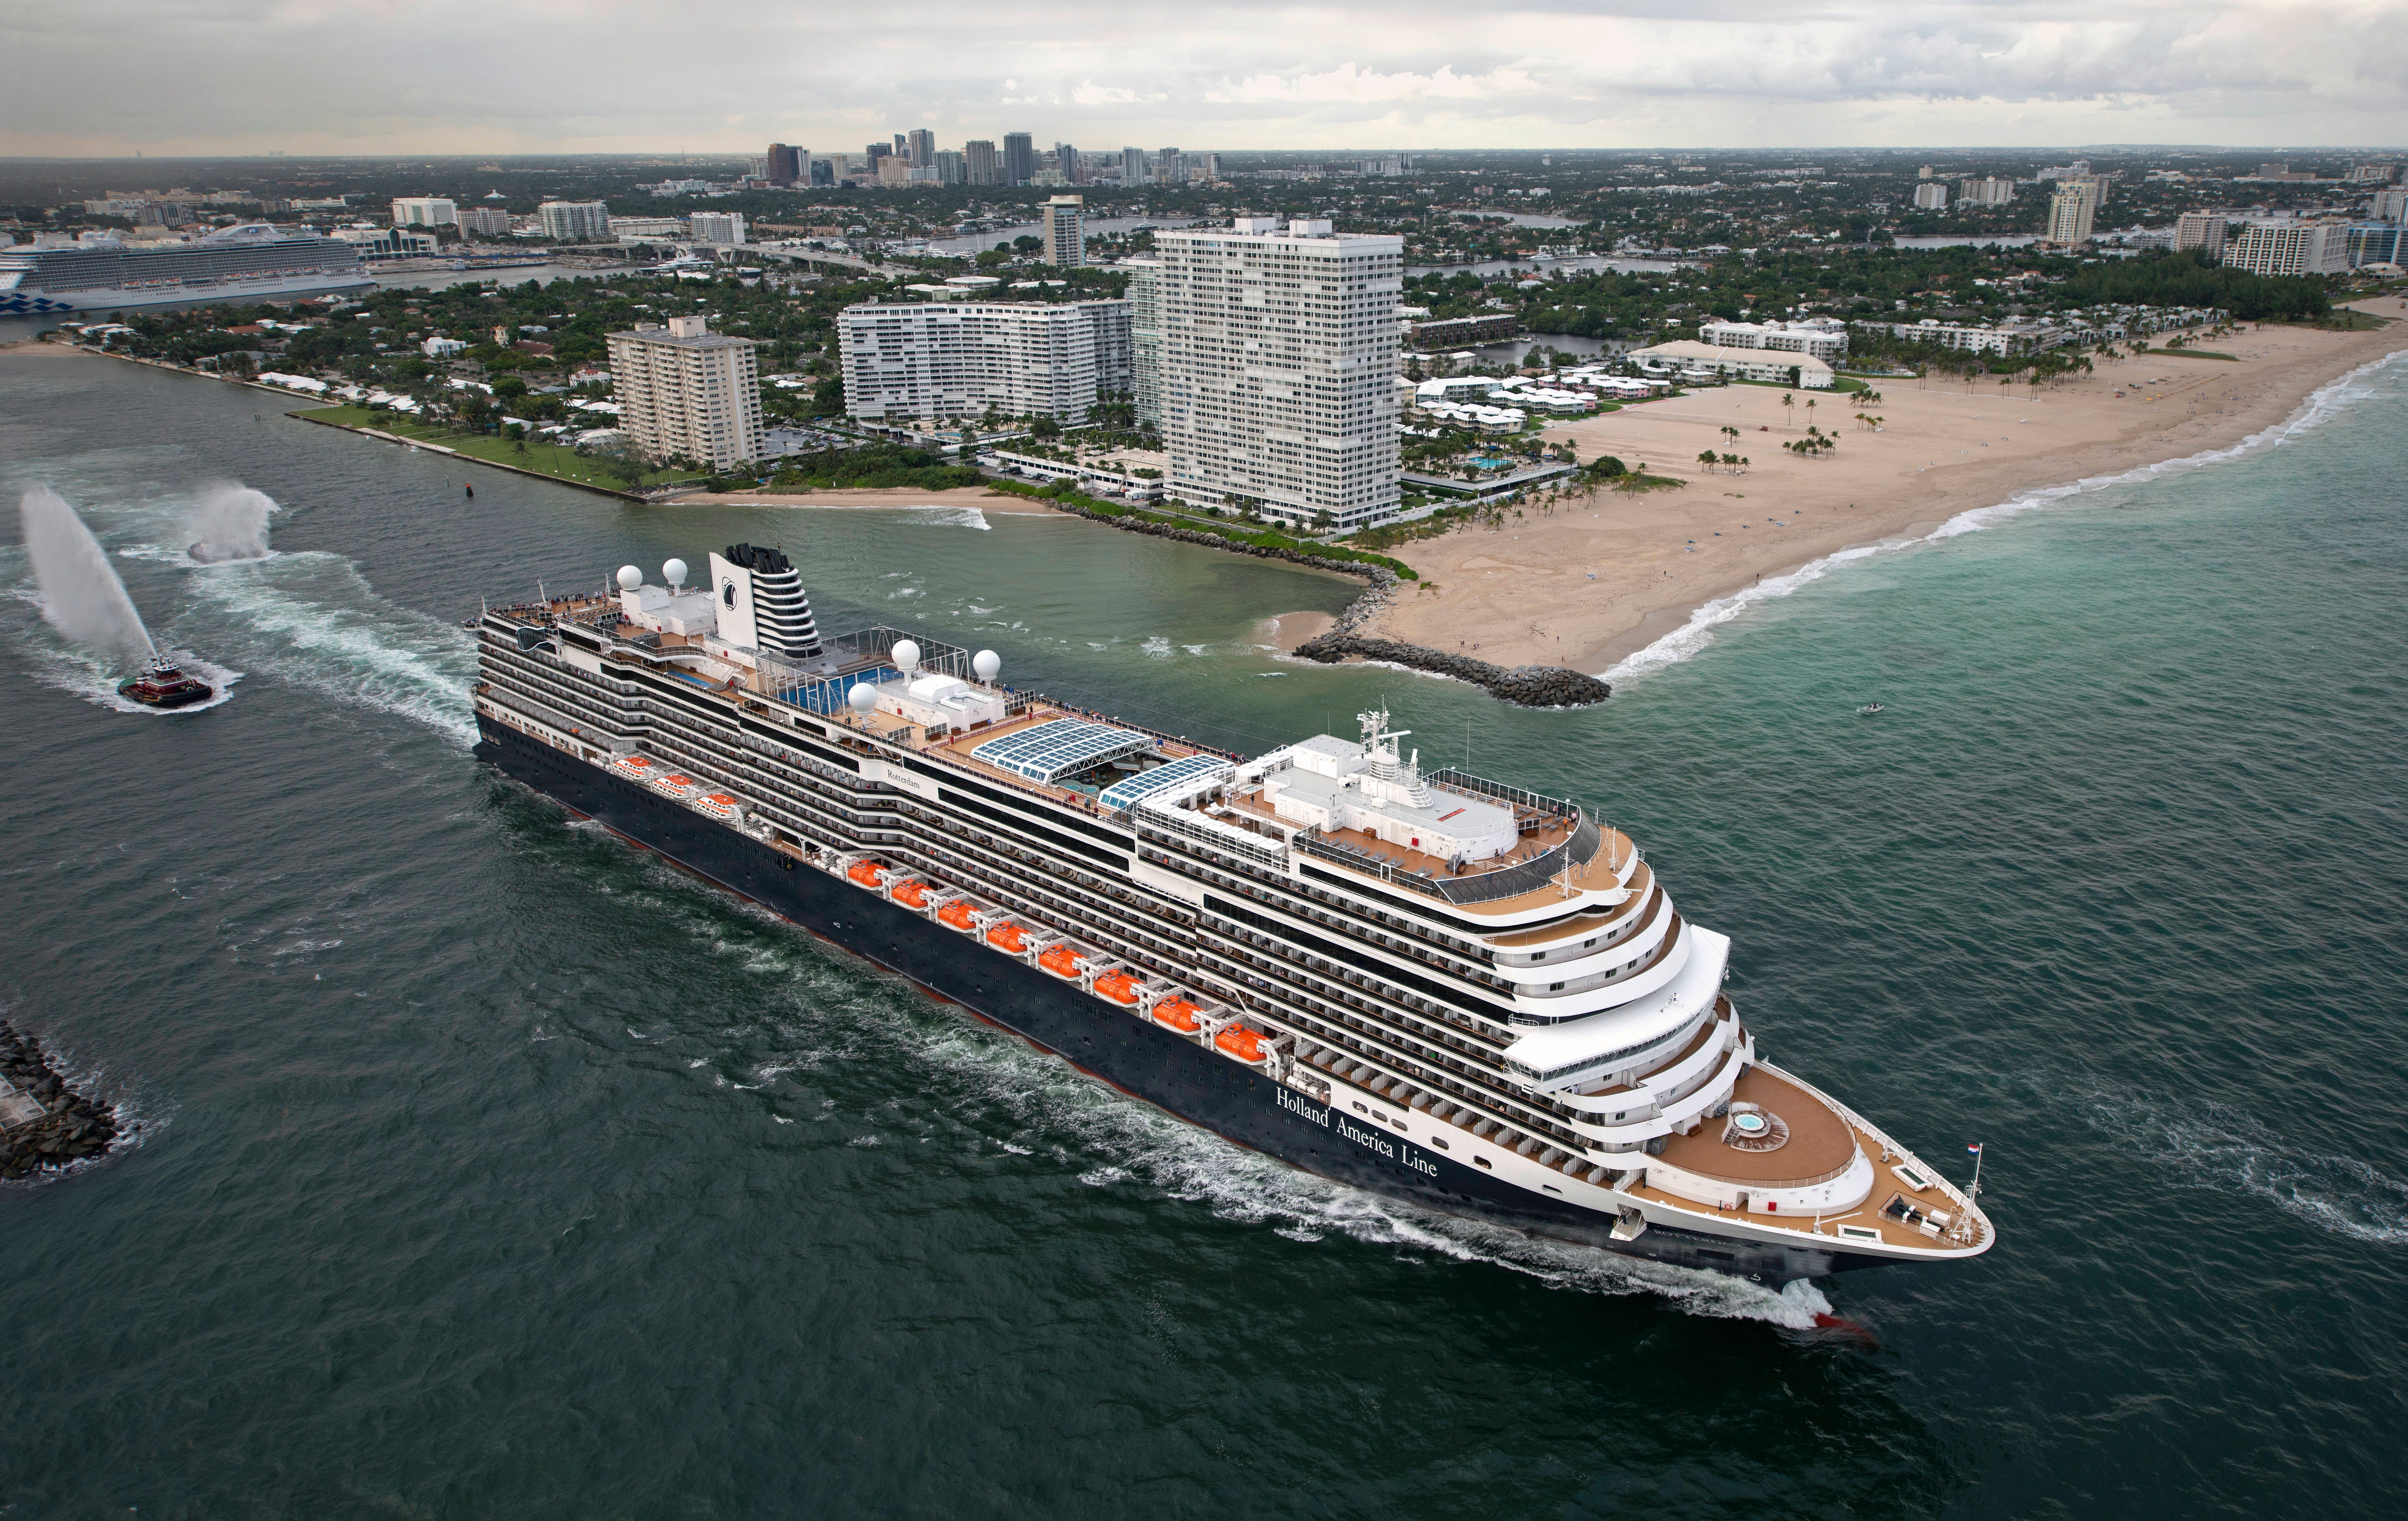 Buying a Holland America Line gift card? Now you can get a bonus one for free